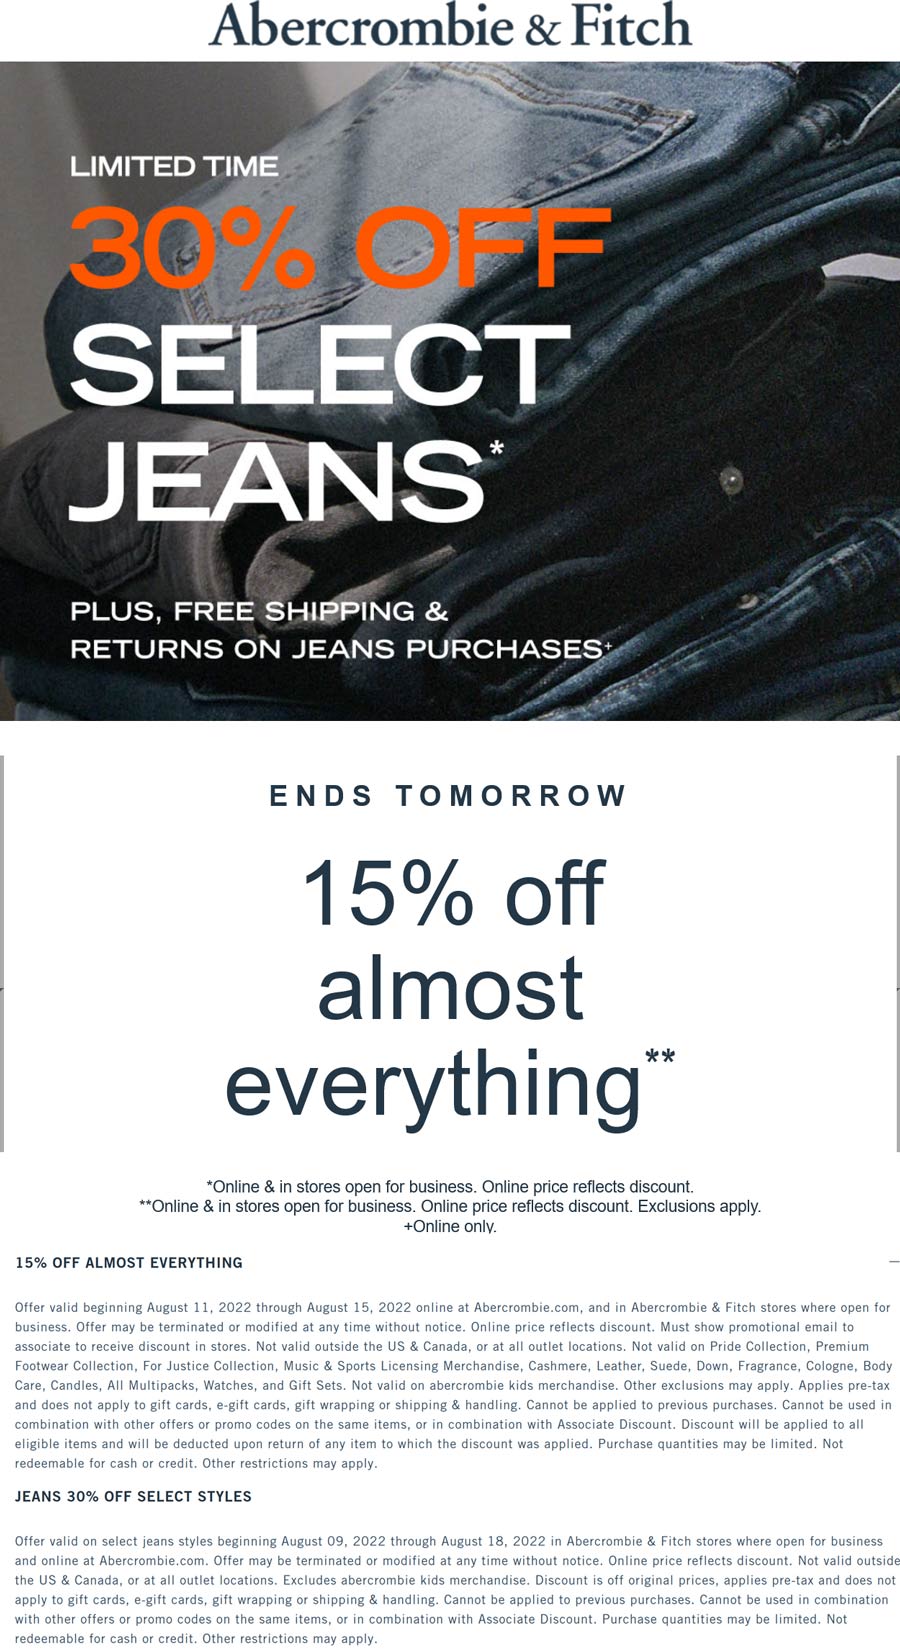 Abercrombie & Fitch stores Coupon  15% off everything & more at Abercrombie & Fitch, ditto online #abercrombiefitch 